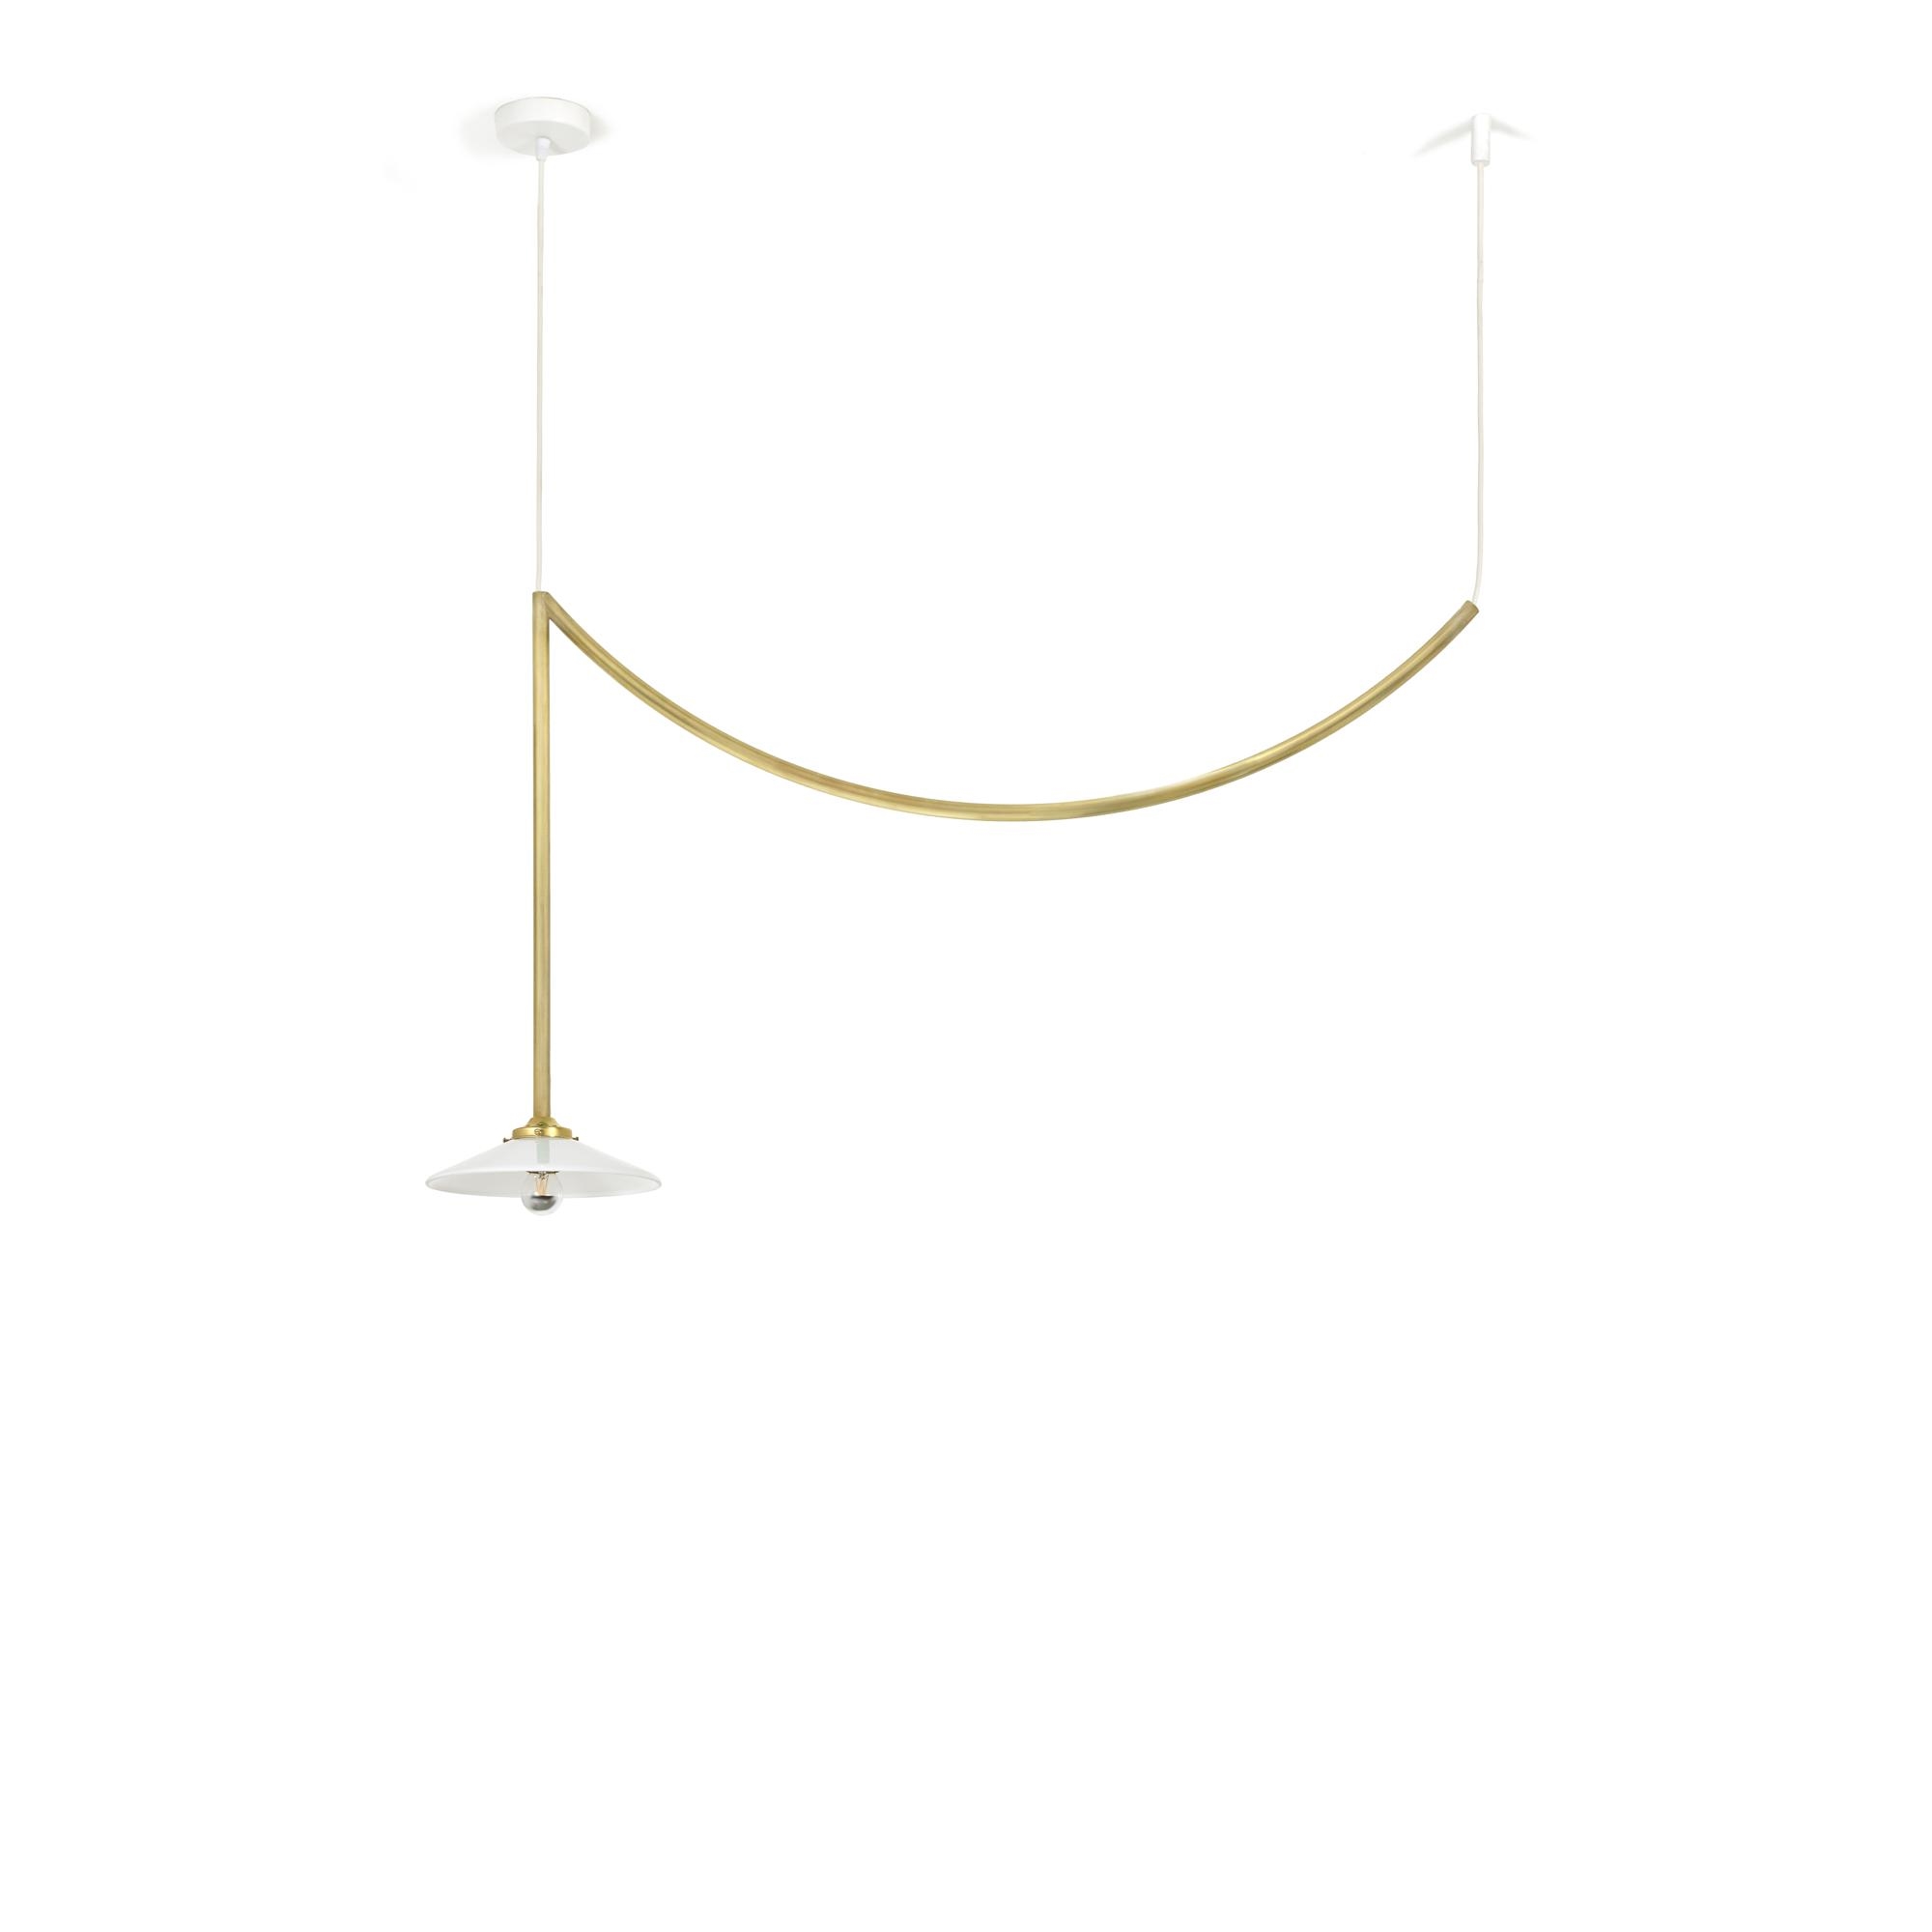 Valerie Objects Ceiling Lamp N°5 Lampa Sufitowa Mosi??ny